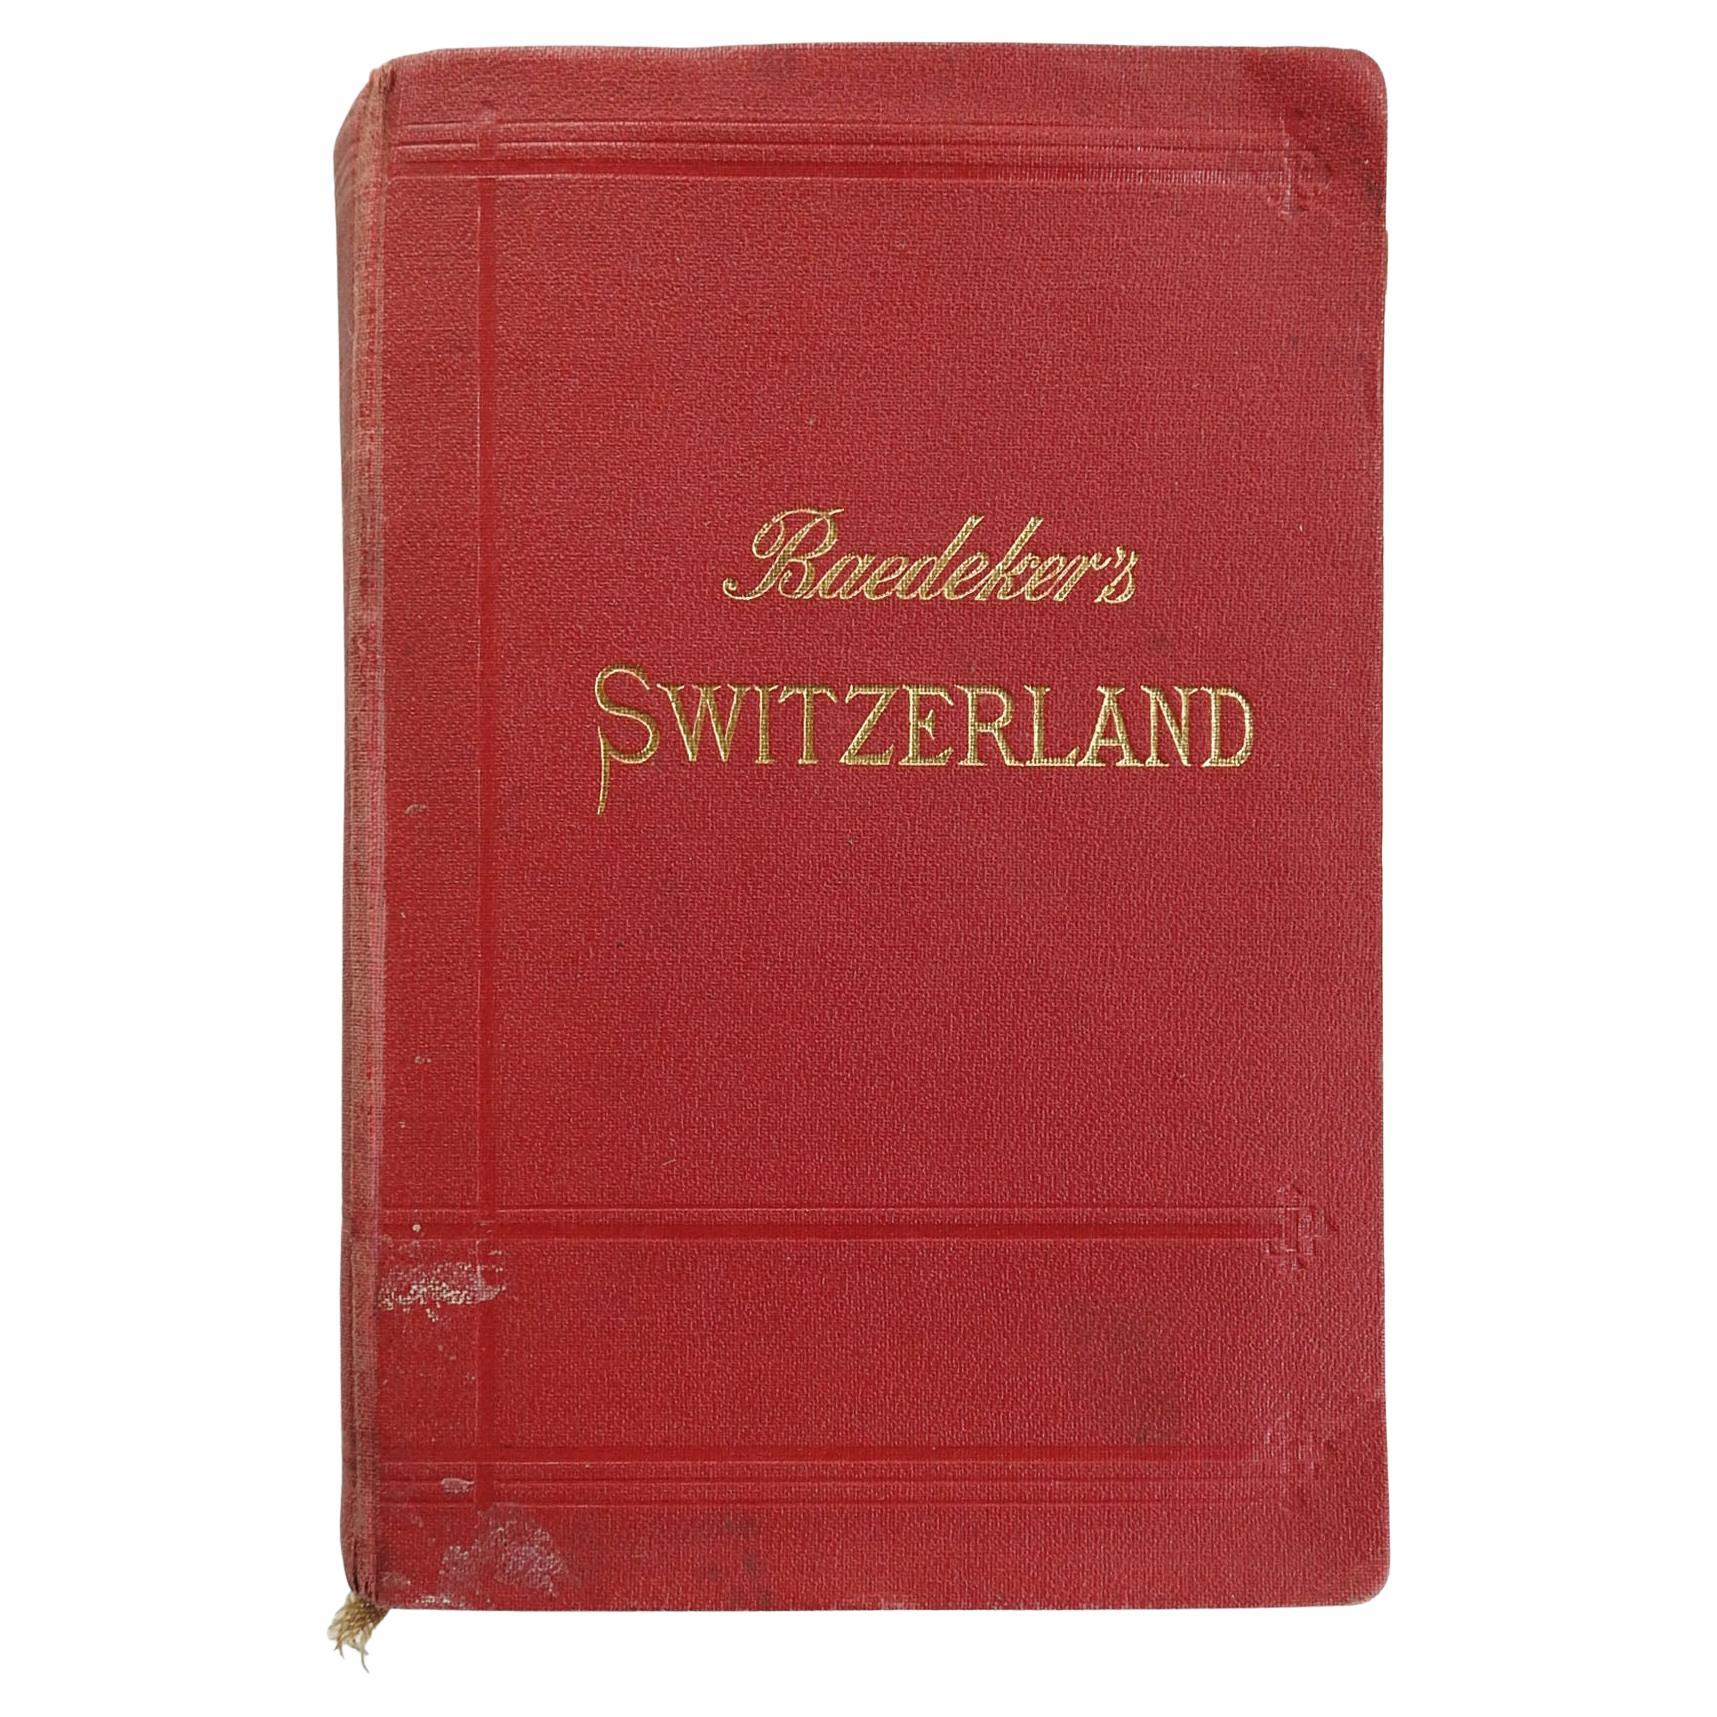 1911 Baedekers Guide to Switzerland